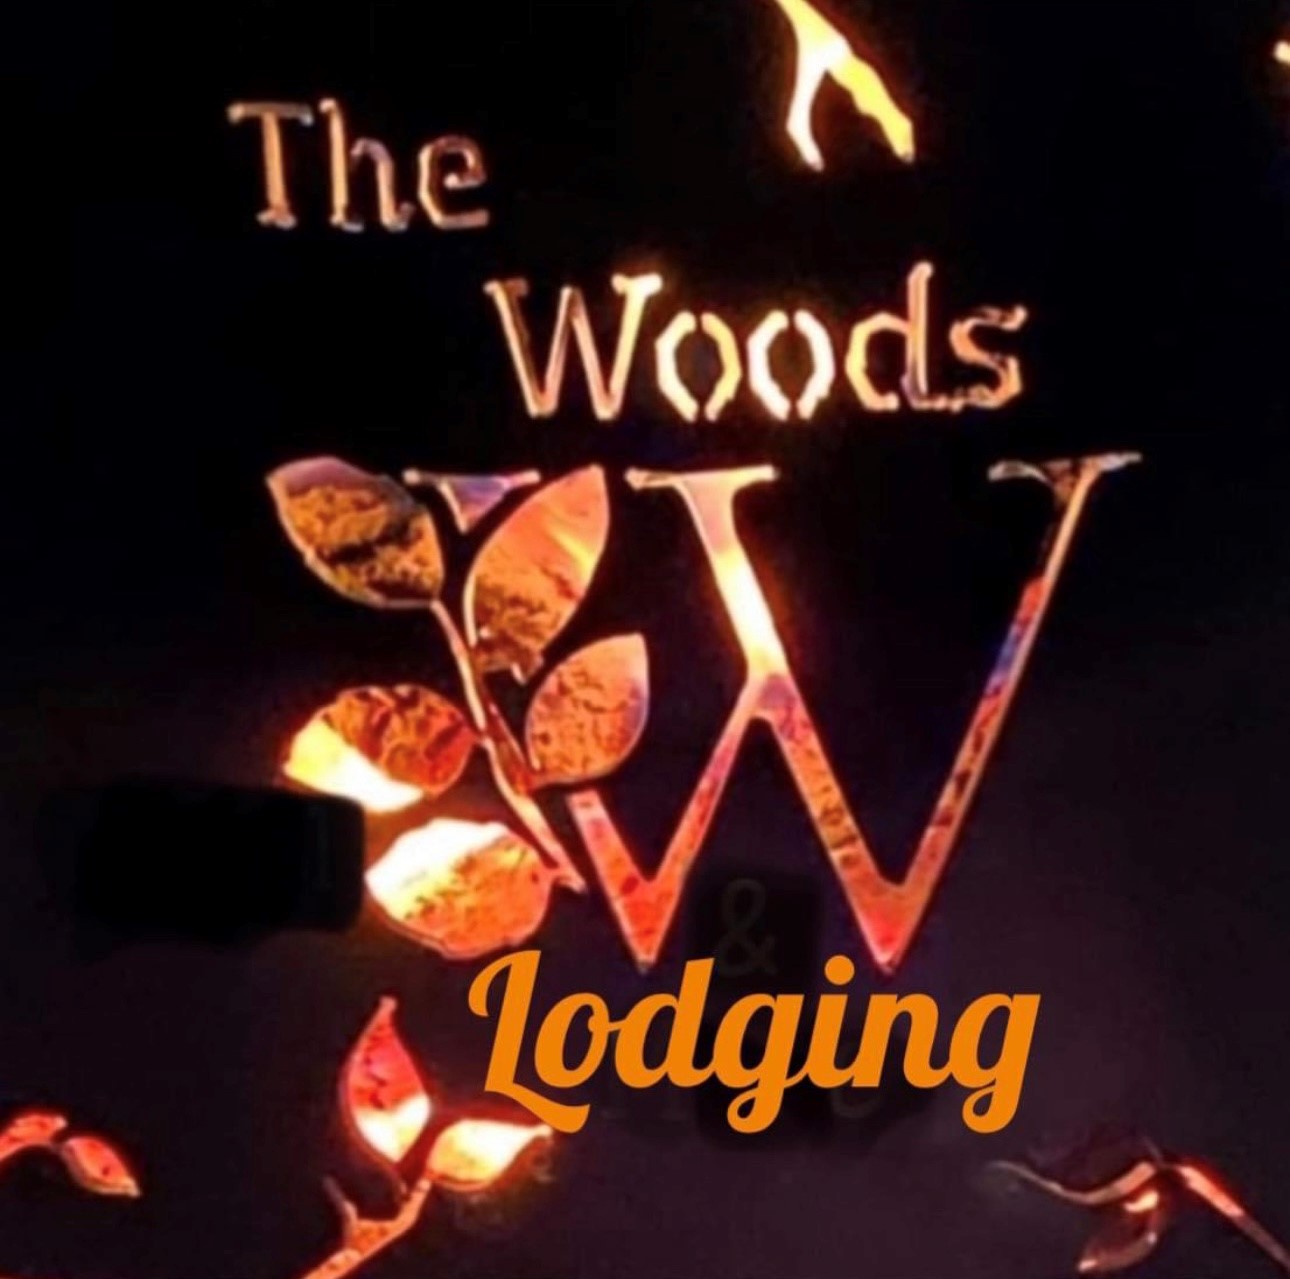 The Woods Lodging